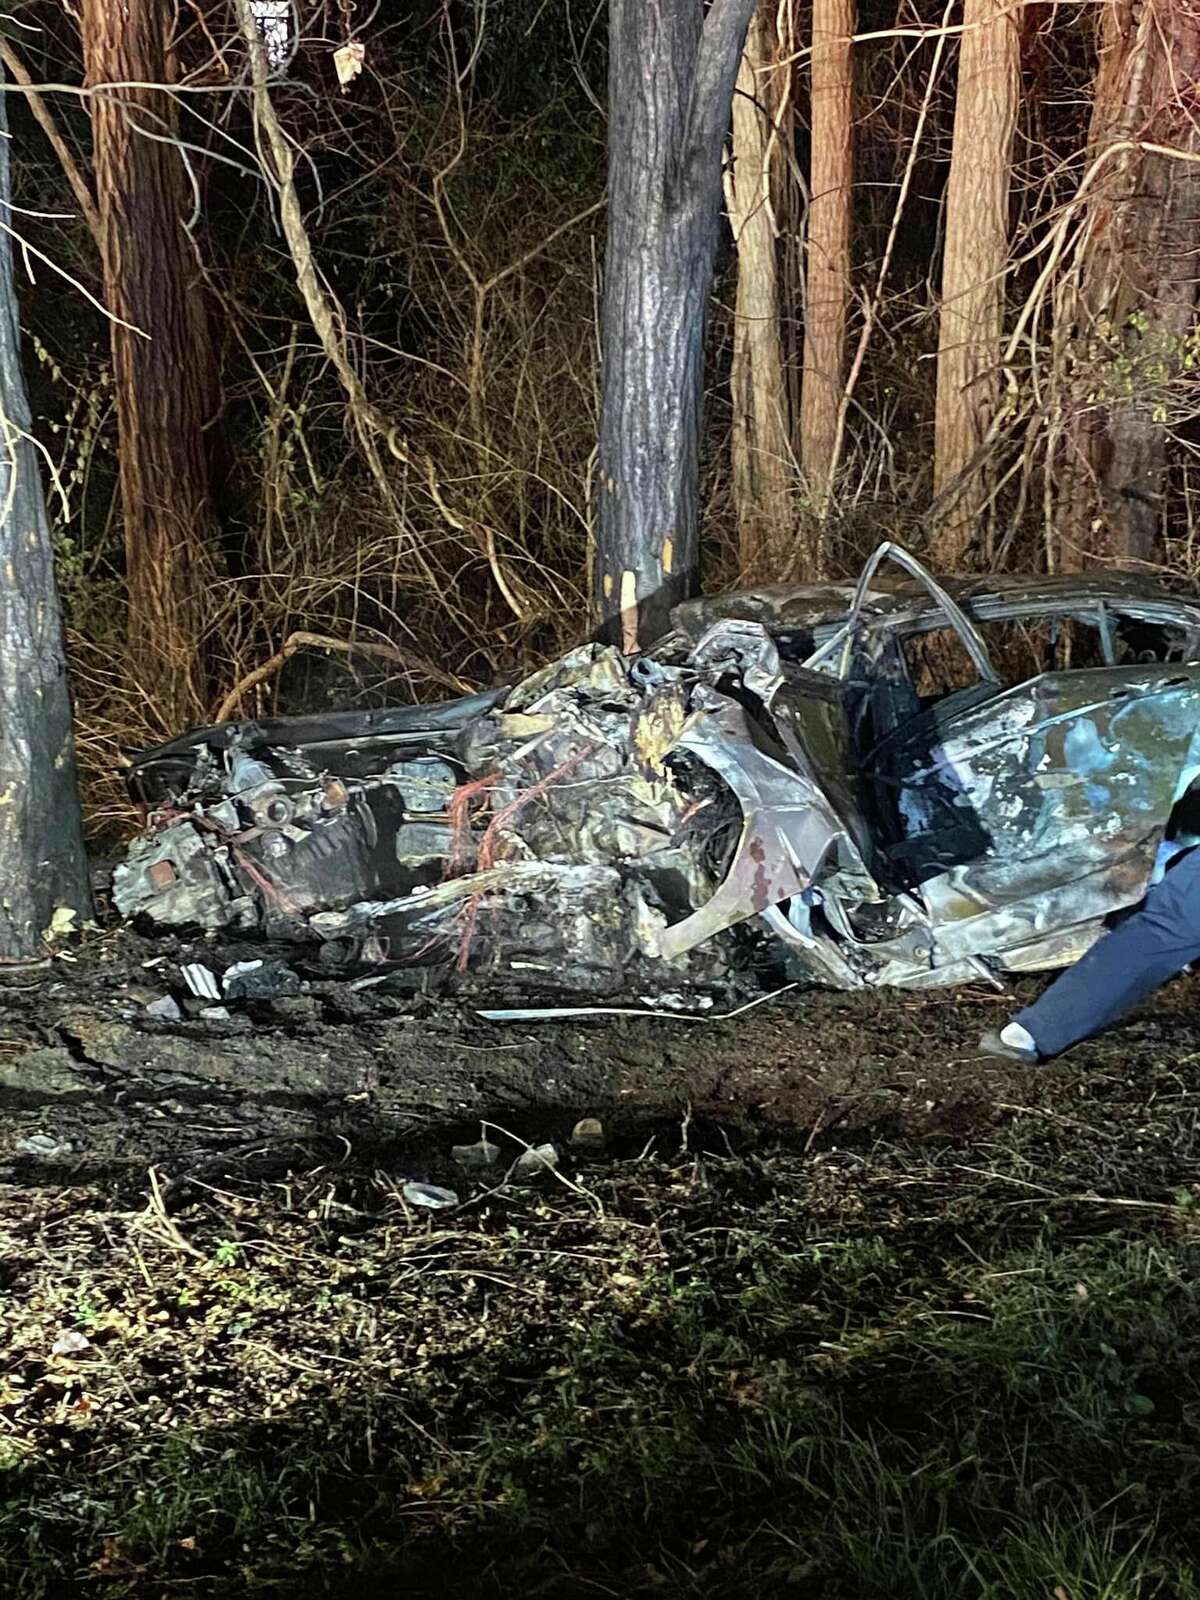 Nicholas Perri, a firefighter in White Plains, N.Y., was on his way home when he rescued a woman from a burning car on Route 7 in Brookfield, officials said.